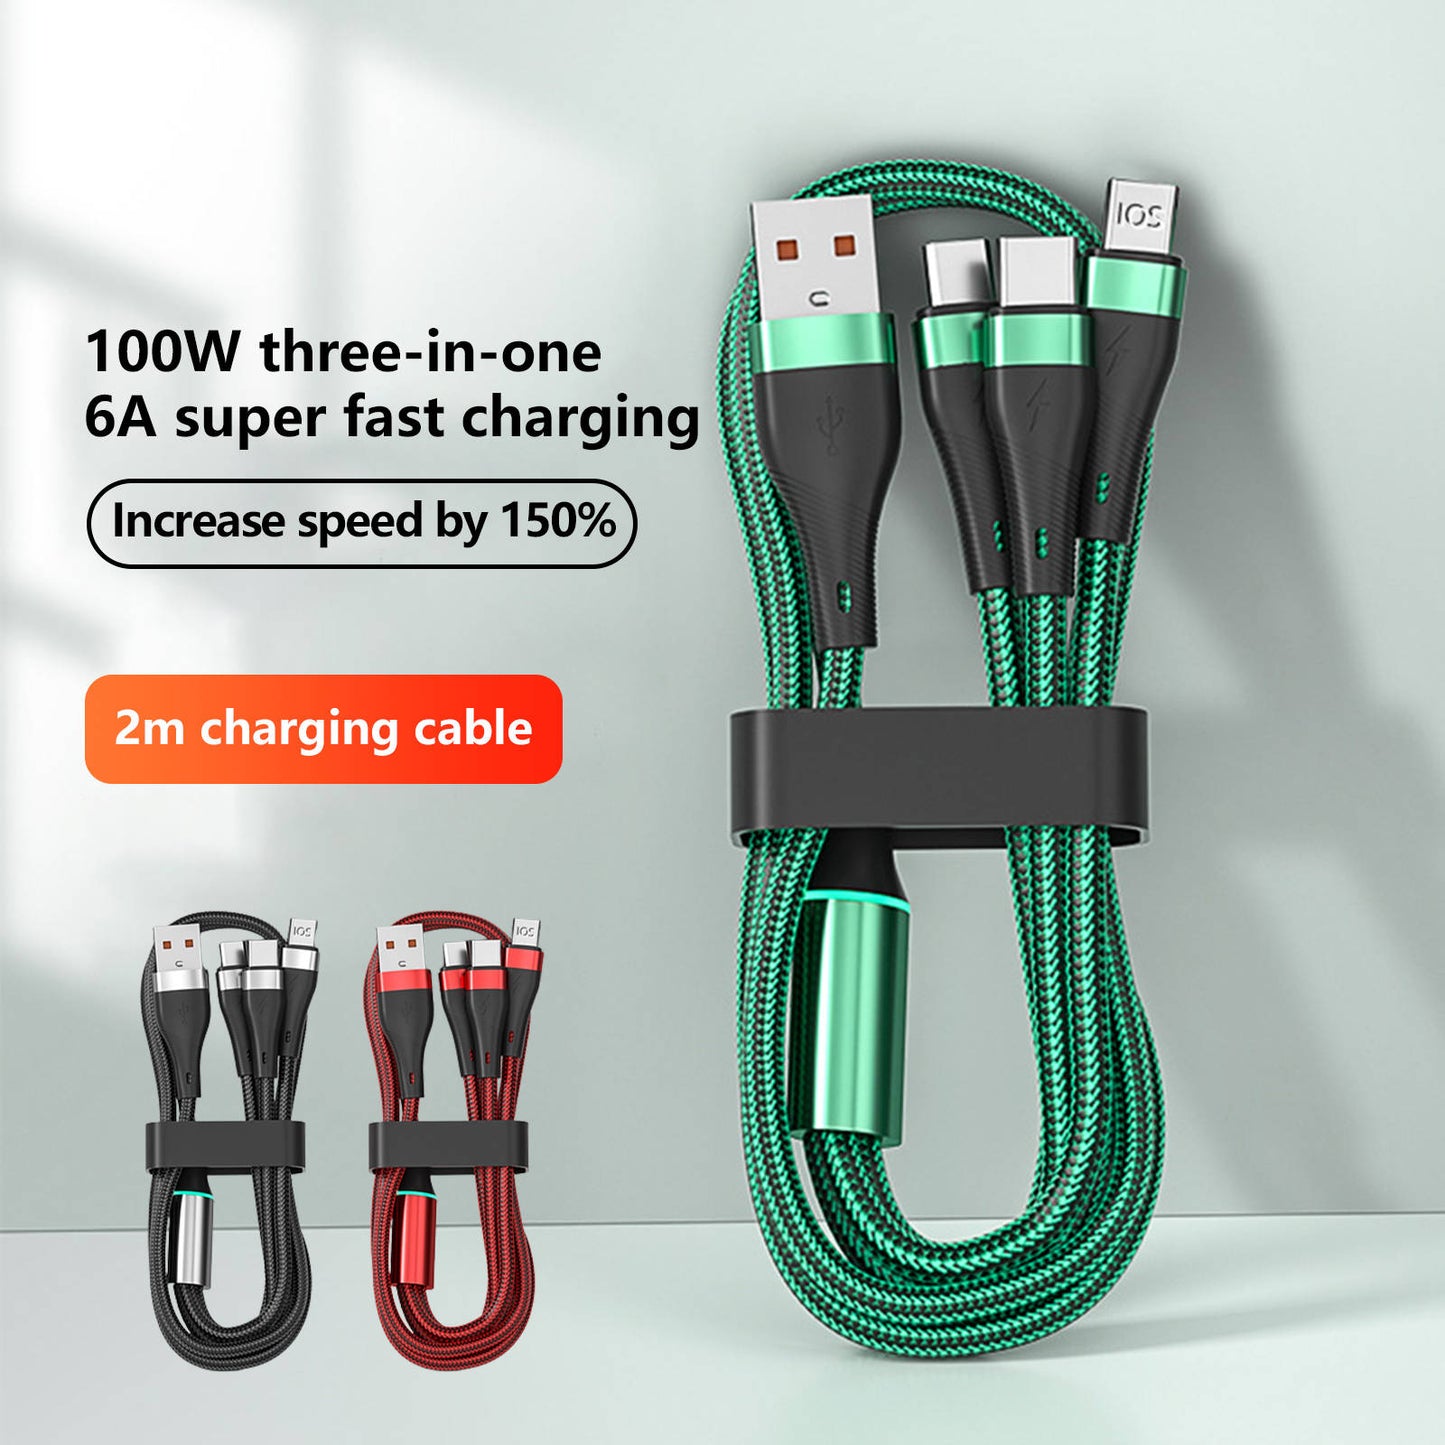 Mobax Nylon Woven Lamp 100W Fast Charging 3-in-1 Charger Cable For Apple Samsung Green